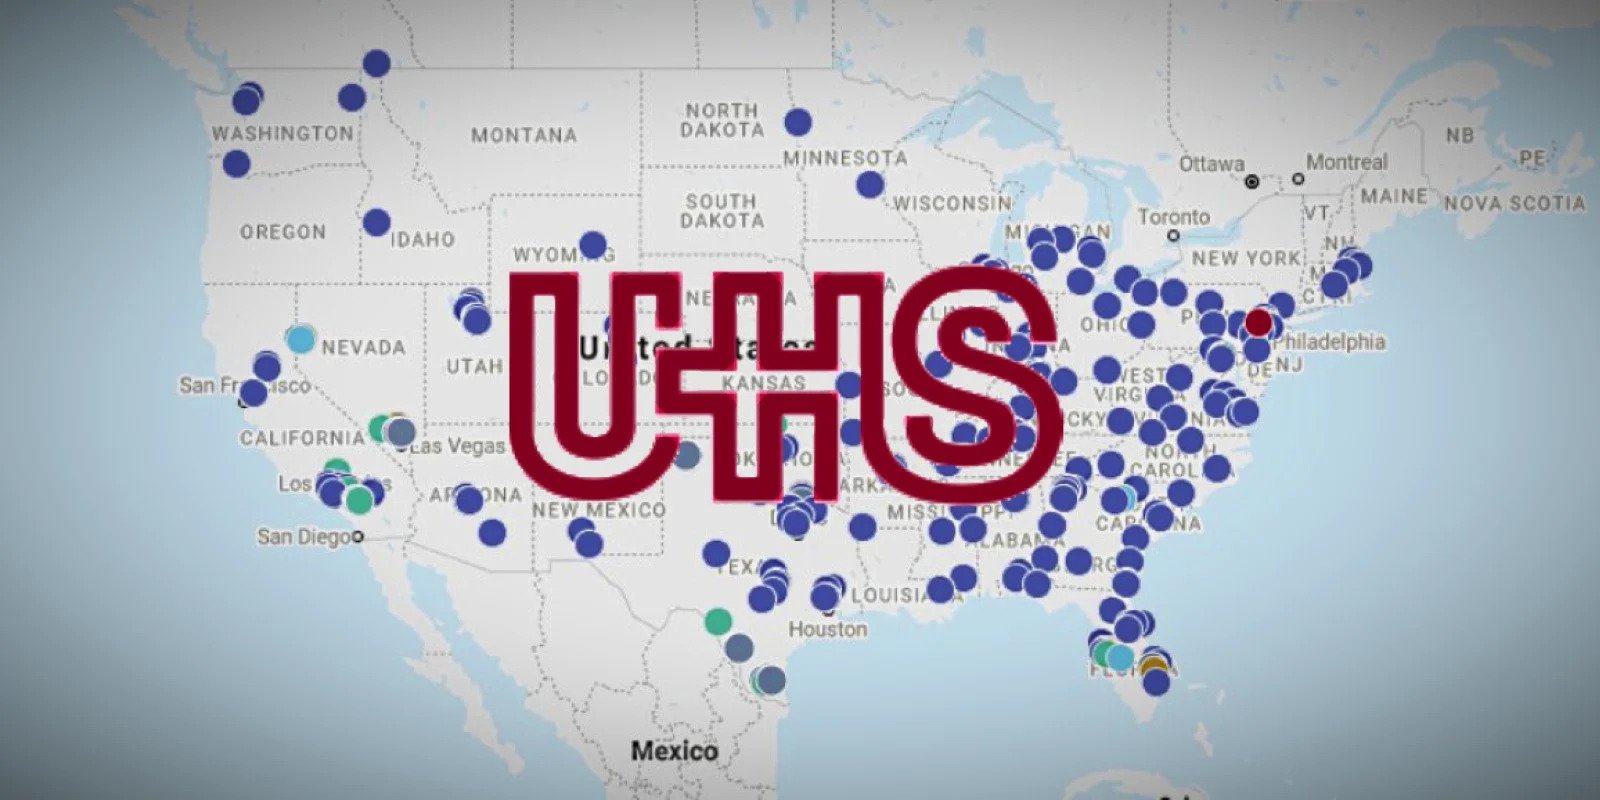 Cybercriminals attacked the UHS network